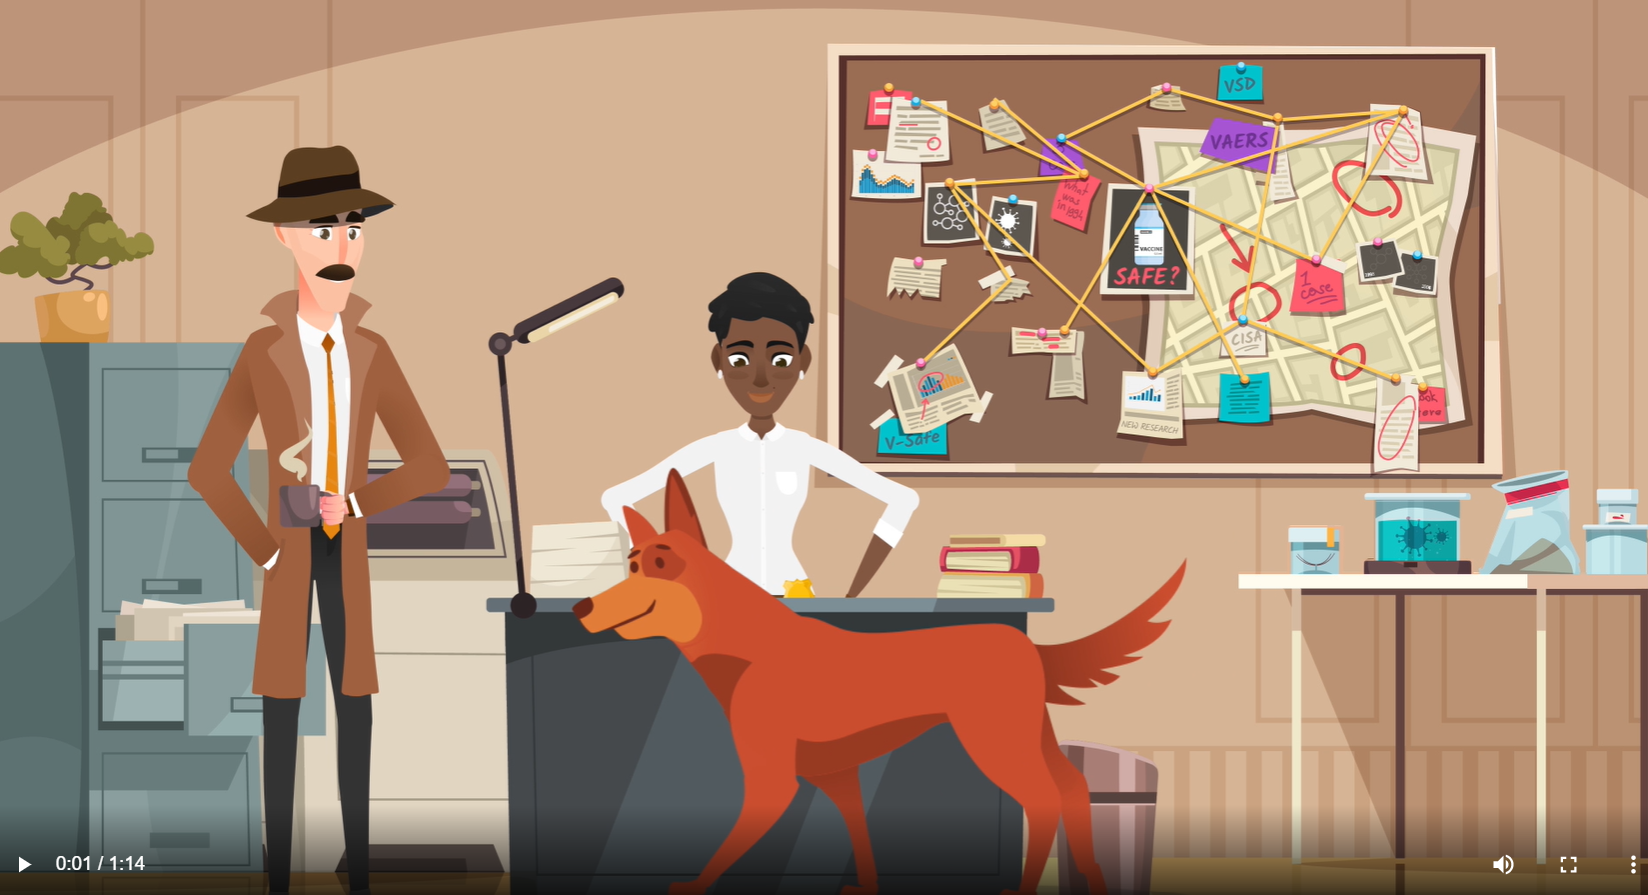 Cartoon image shows a white man dressed like a detective, a Black woman sitting at a desk and a dog